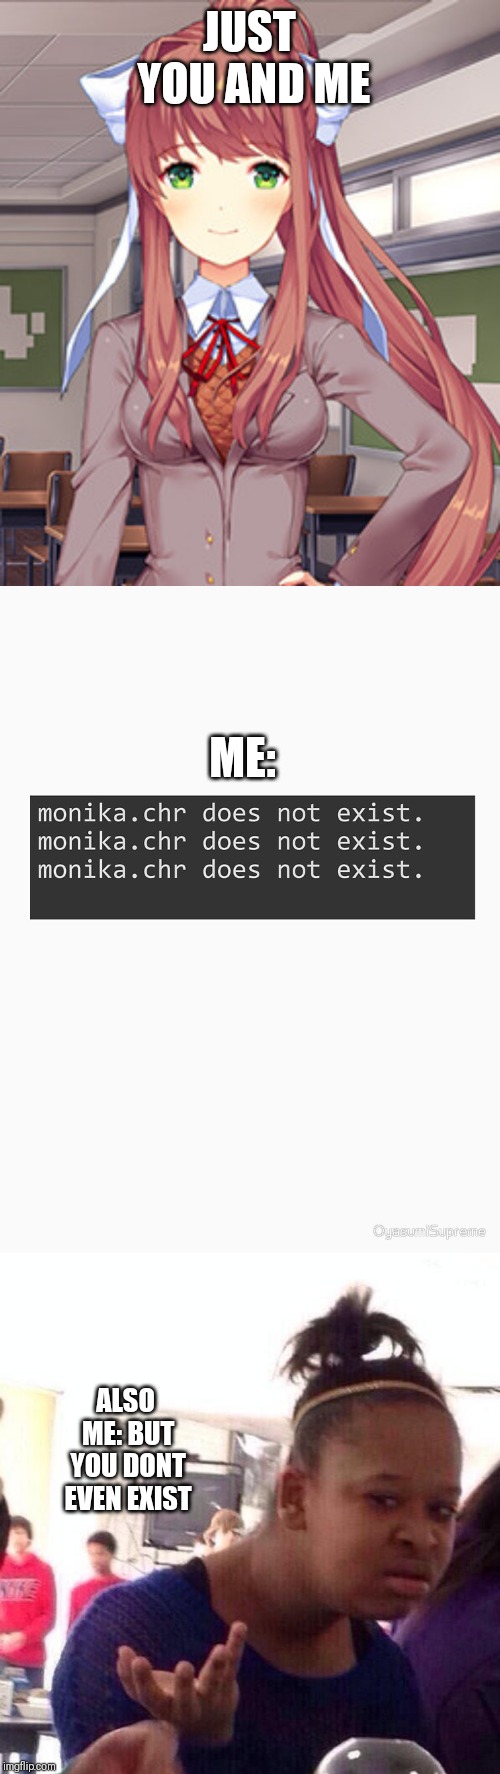 JUST YOU AND ME; ME:; ALSO ME: BUT YOU DONT EVEN EXIST | image tagged in memes,black girl wat | made w/ Imgflip meme maker